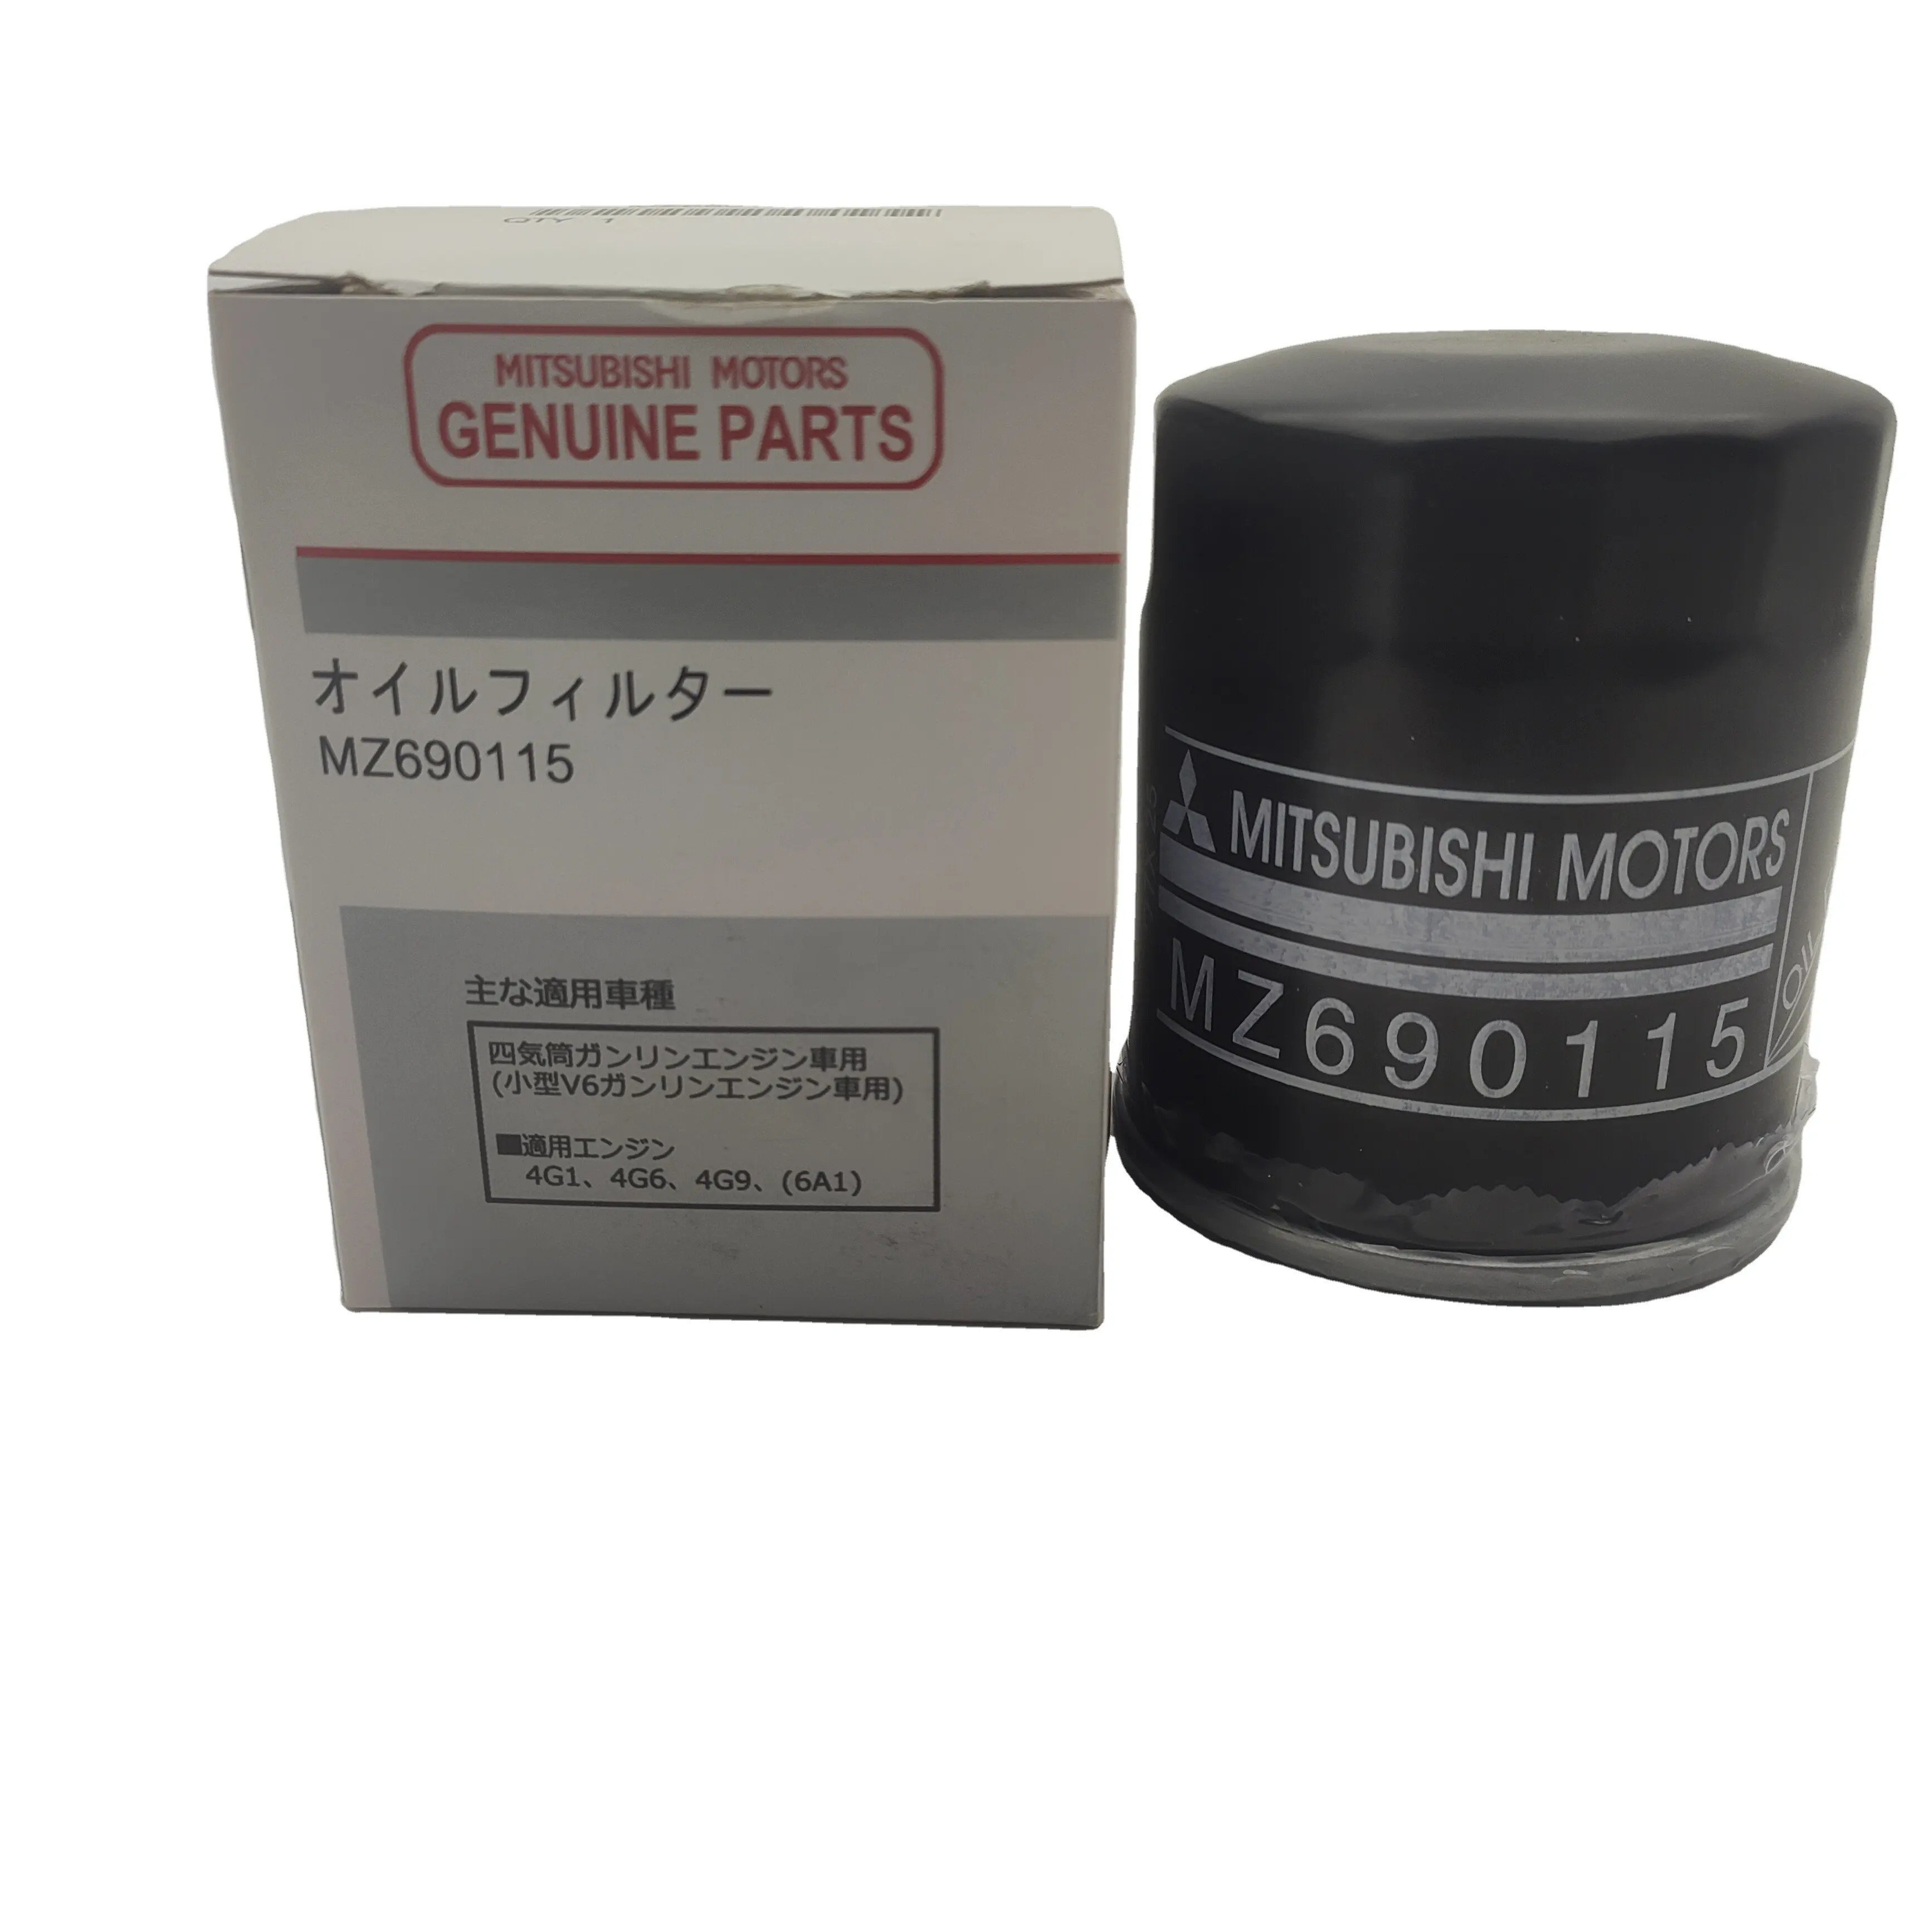 Car Parts Engine Oil Filter Md135737 Mz690115